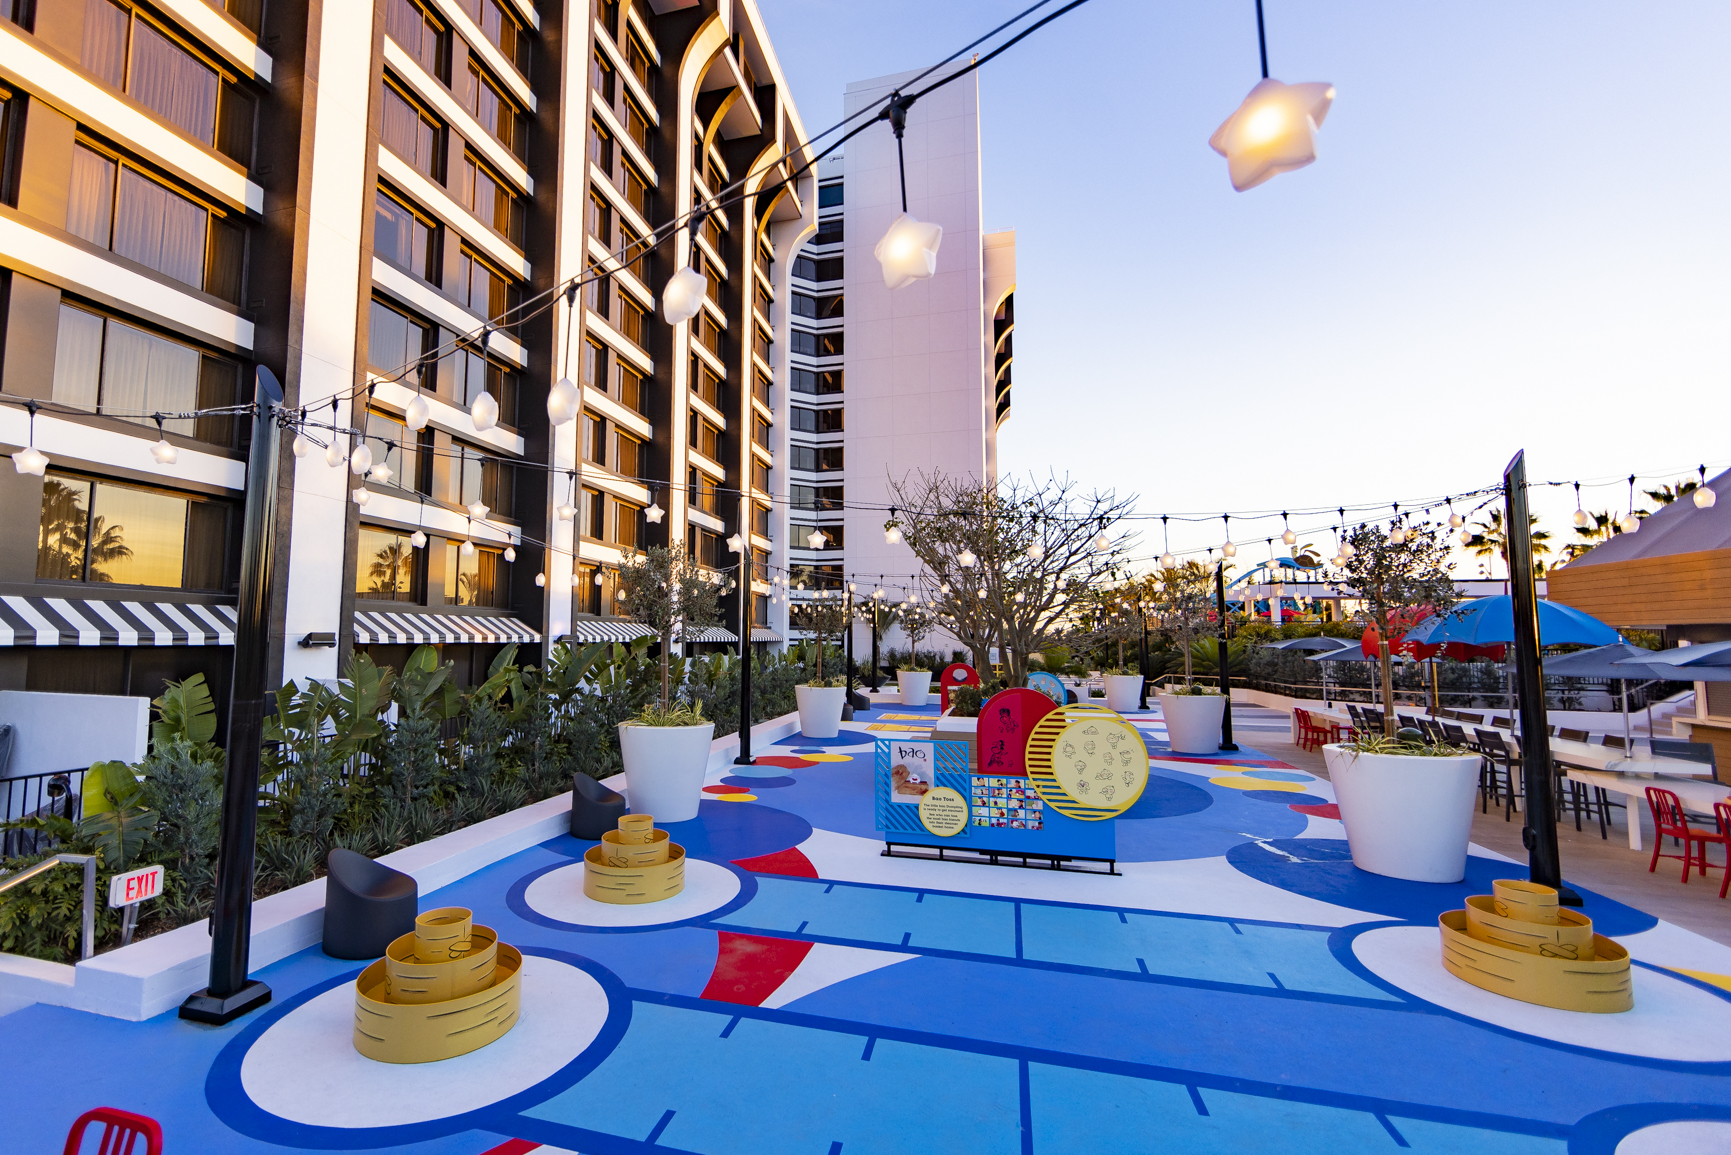 Guests can enjoy their stay by heading to the Pixar Shorts Court on the rooftop deck of Pixar Place Hotel at Disneyland Resort in Anaheim, Calif., with interactive games and imaginative free play inspired by Pixar’s famous short films “La Luna,” “Bao,” “For the Birds” and “Burrow.” (Christian Thompson/Disneyland Resort)